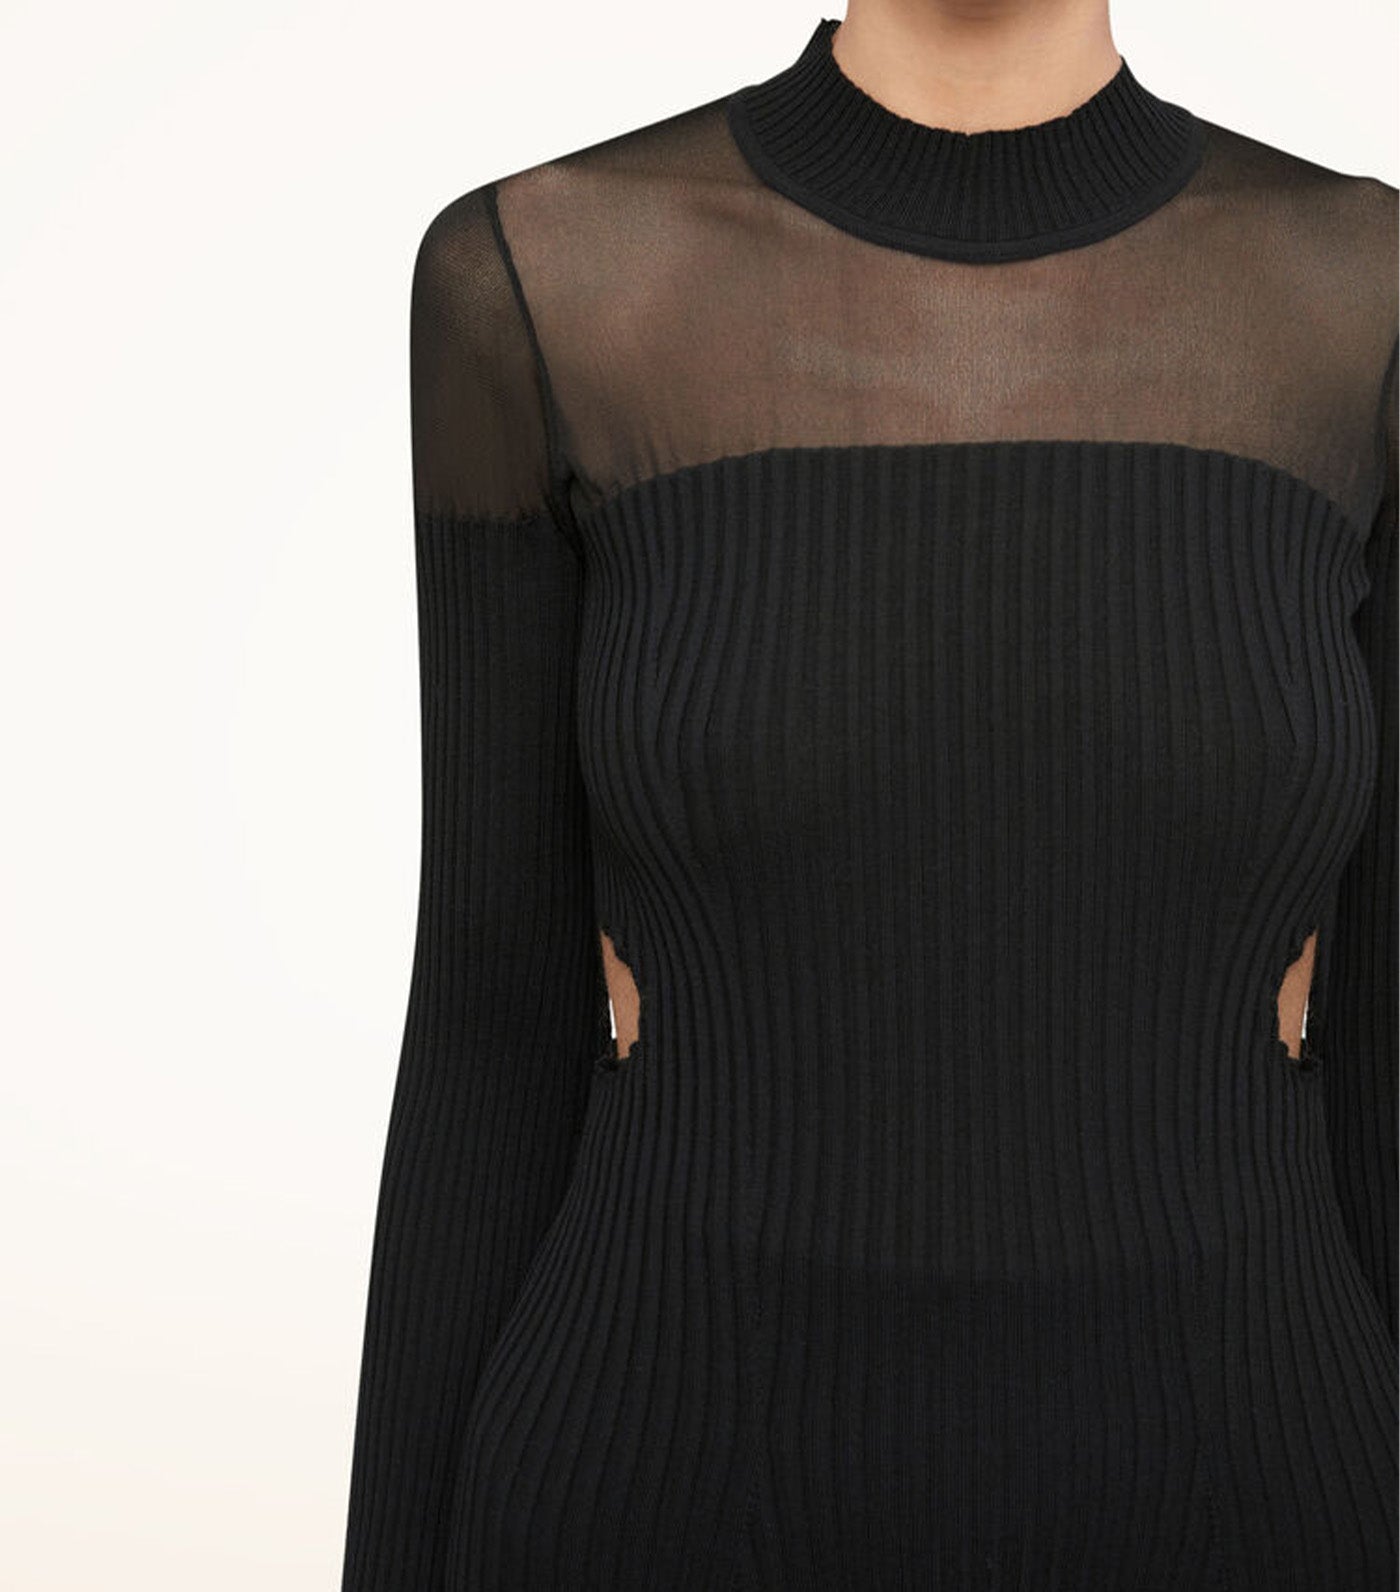  Wolford Merino Rib Top Long Sleeves for Women Black : Clothing,  Shoes & Jewelry